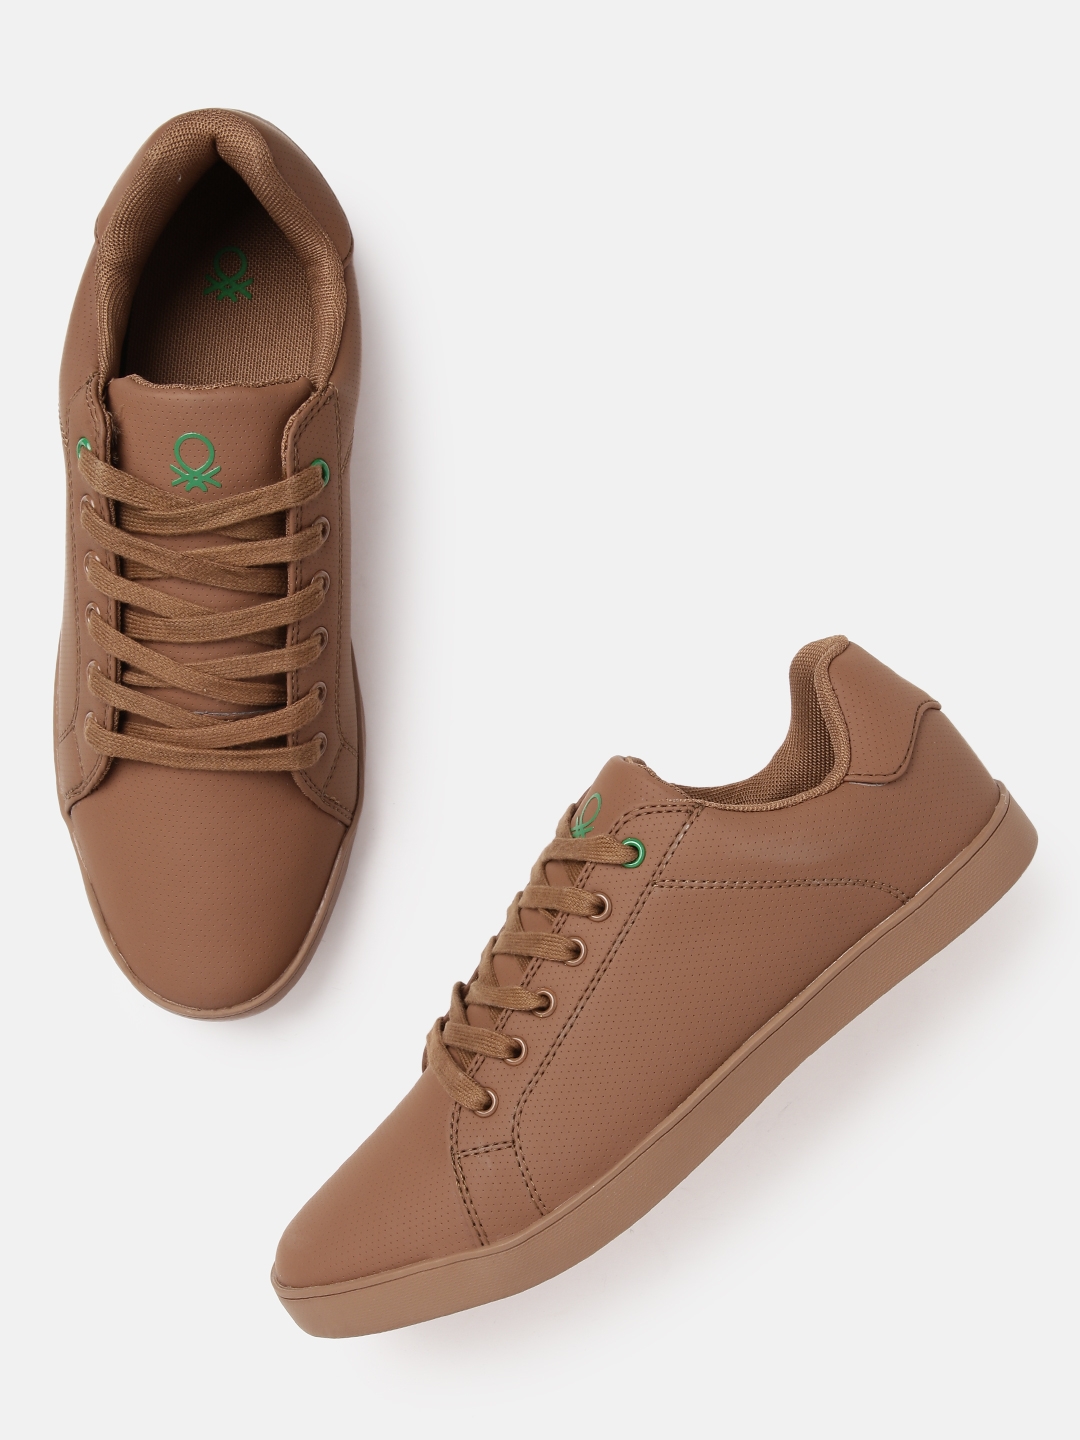 United Colors of Benetton Men Brown Perforated Sneakers